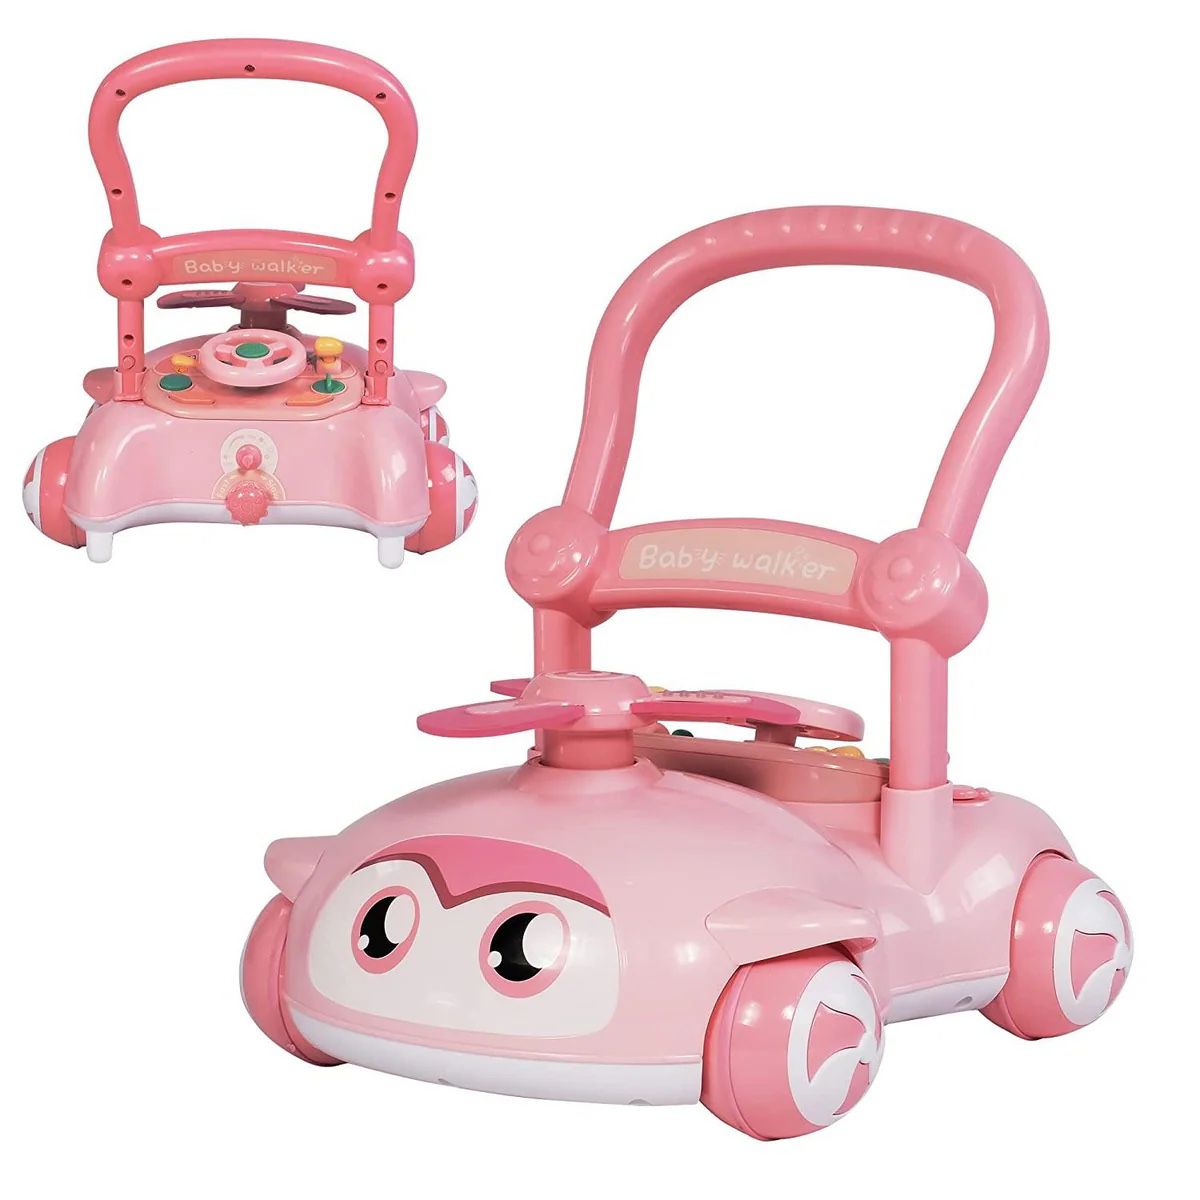 2 in 1 Sit-to-Stand Baby Walker for Boy Girl, Detachable, with Lights and Music, Cute Toys for Toddlers (Pink)